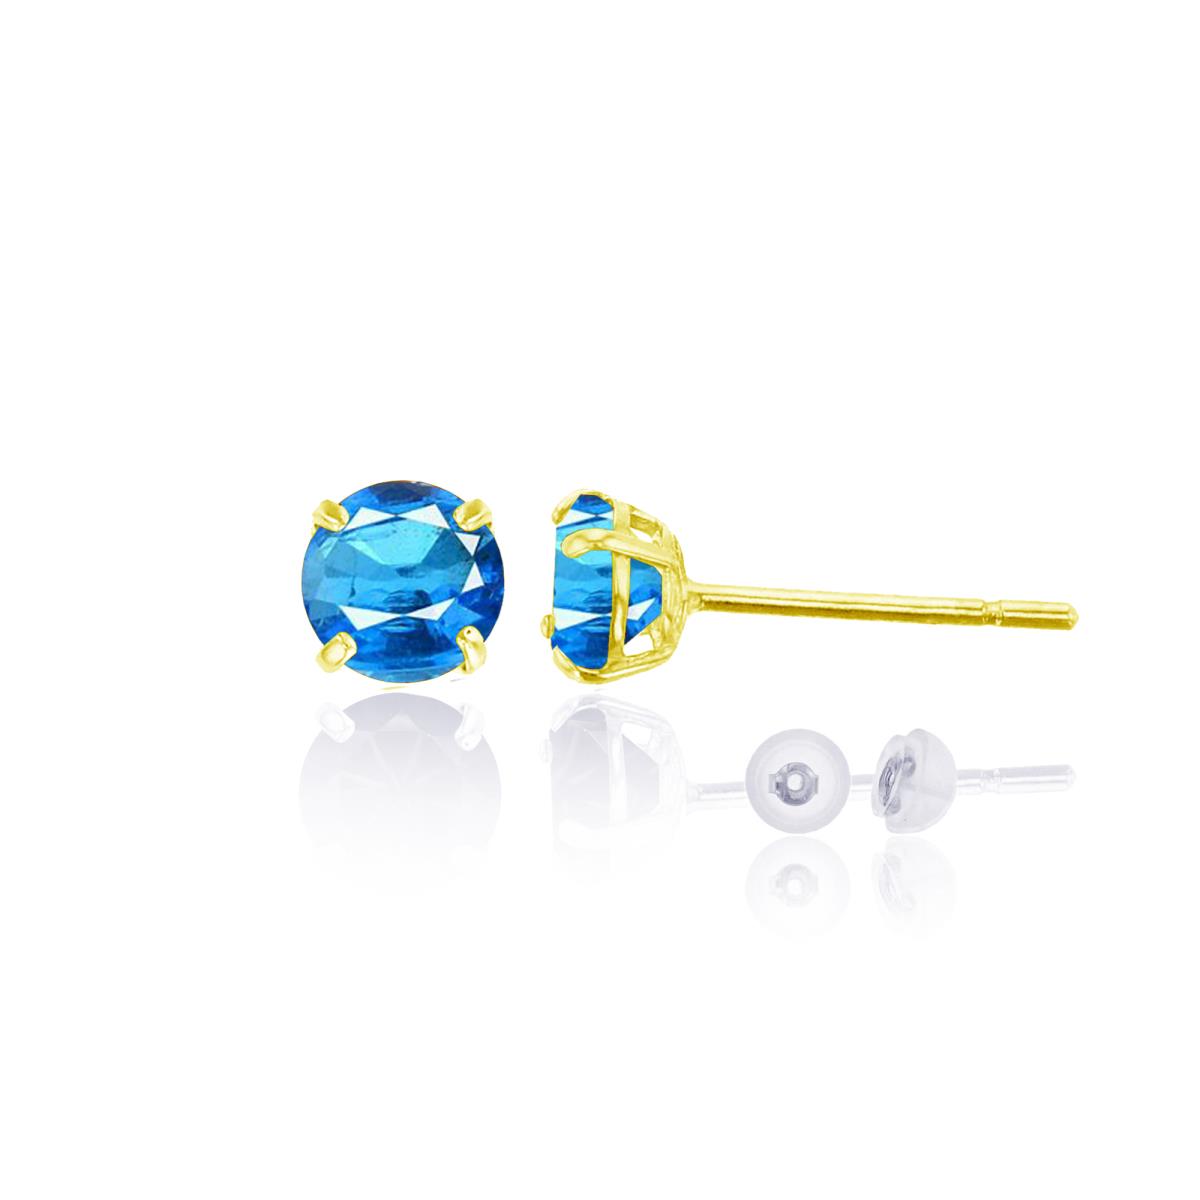 10K Yellow Gold 6.00mm Round Blue Apatite Stud Earring